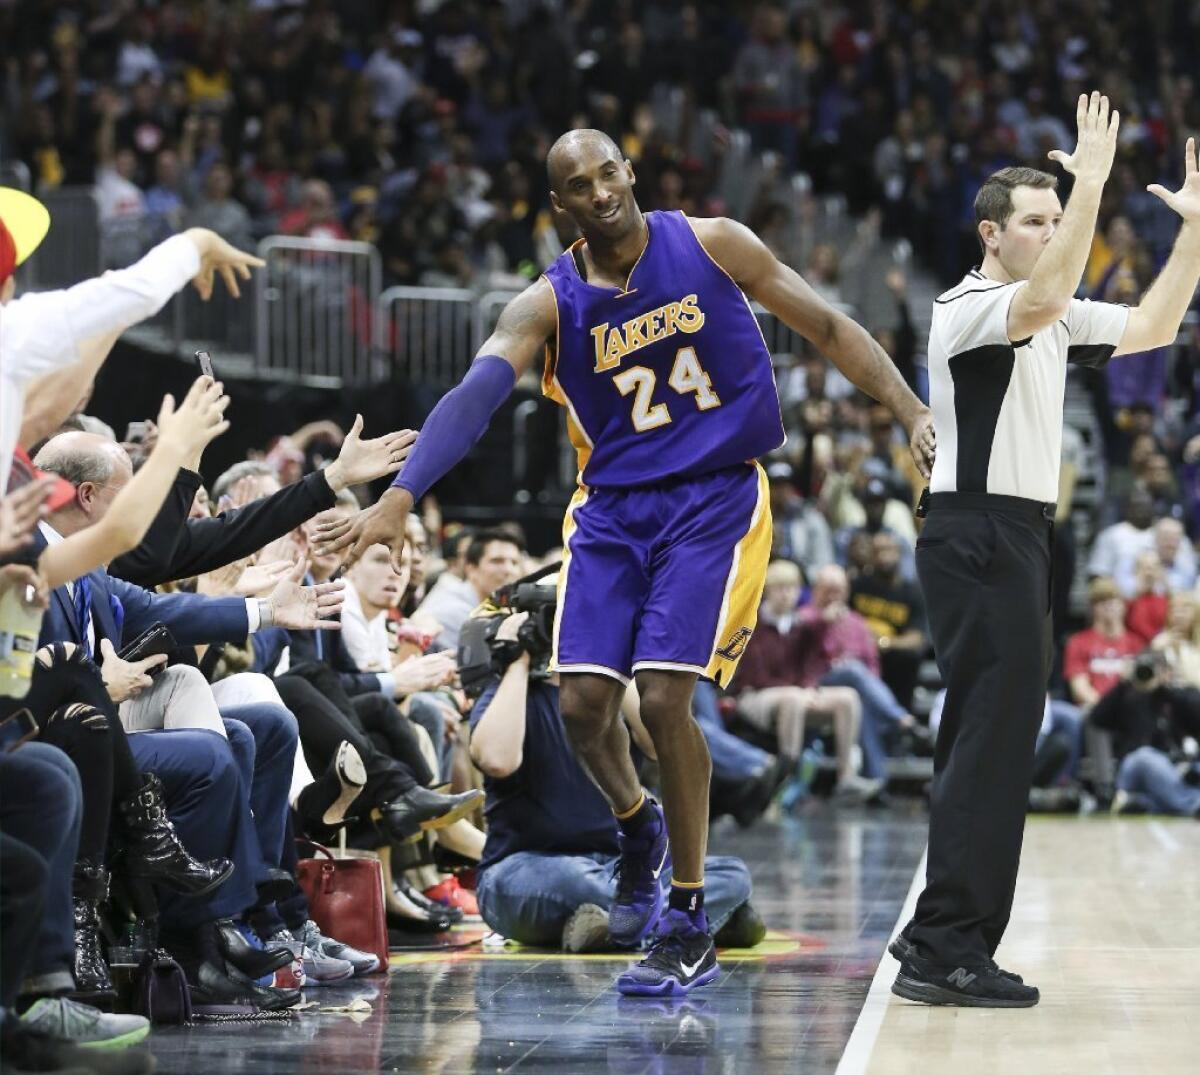 Kobe Bryant high-fives some fans during the Lakers' 100-87 loss to the Atlanta Hawks on Dec. 4.